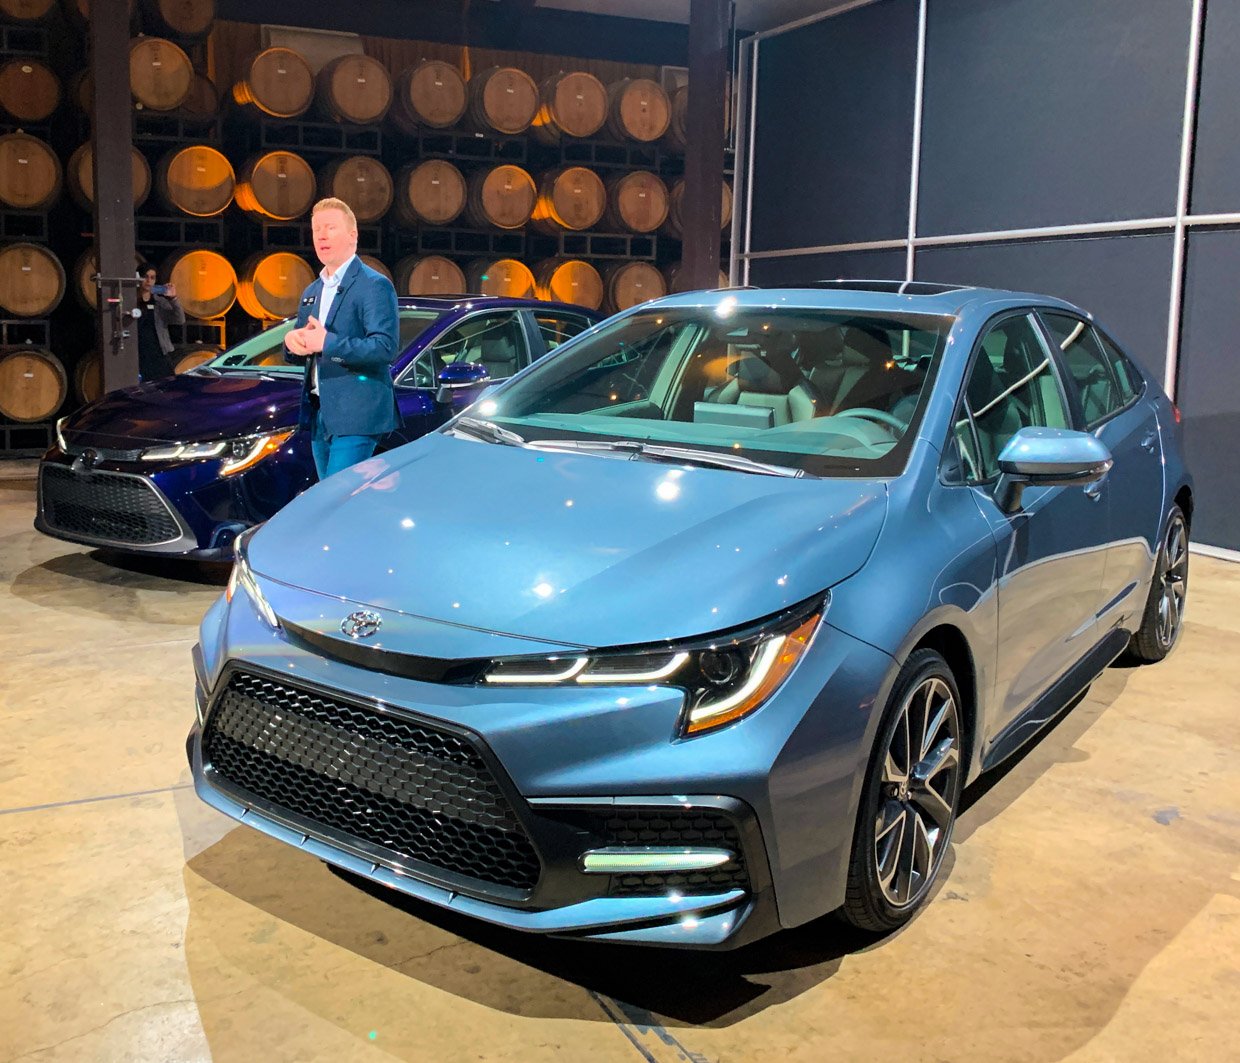 2020 Toyota Corolla Revealed: A New Sedan for a New Decade